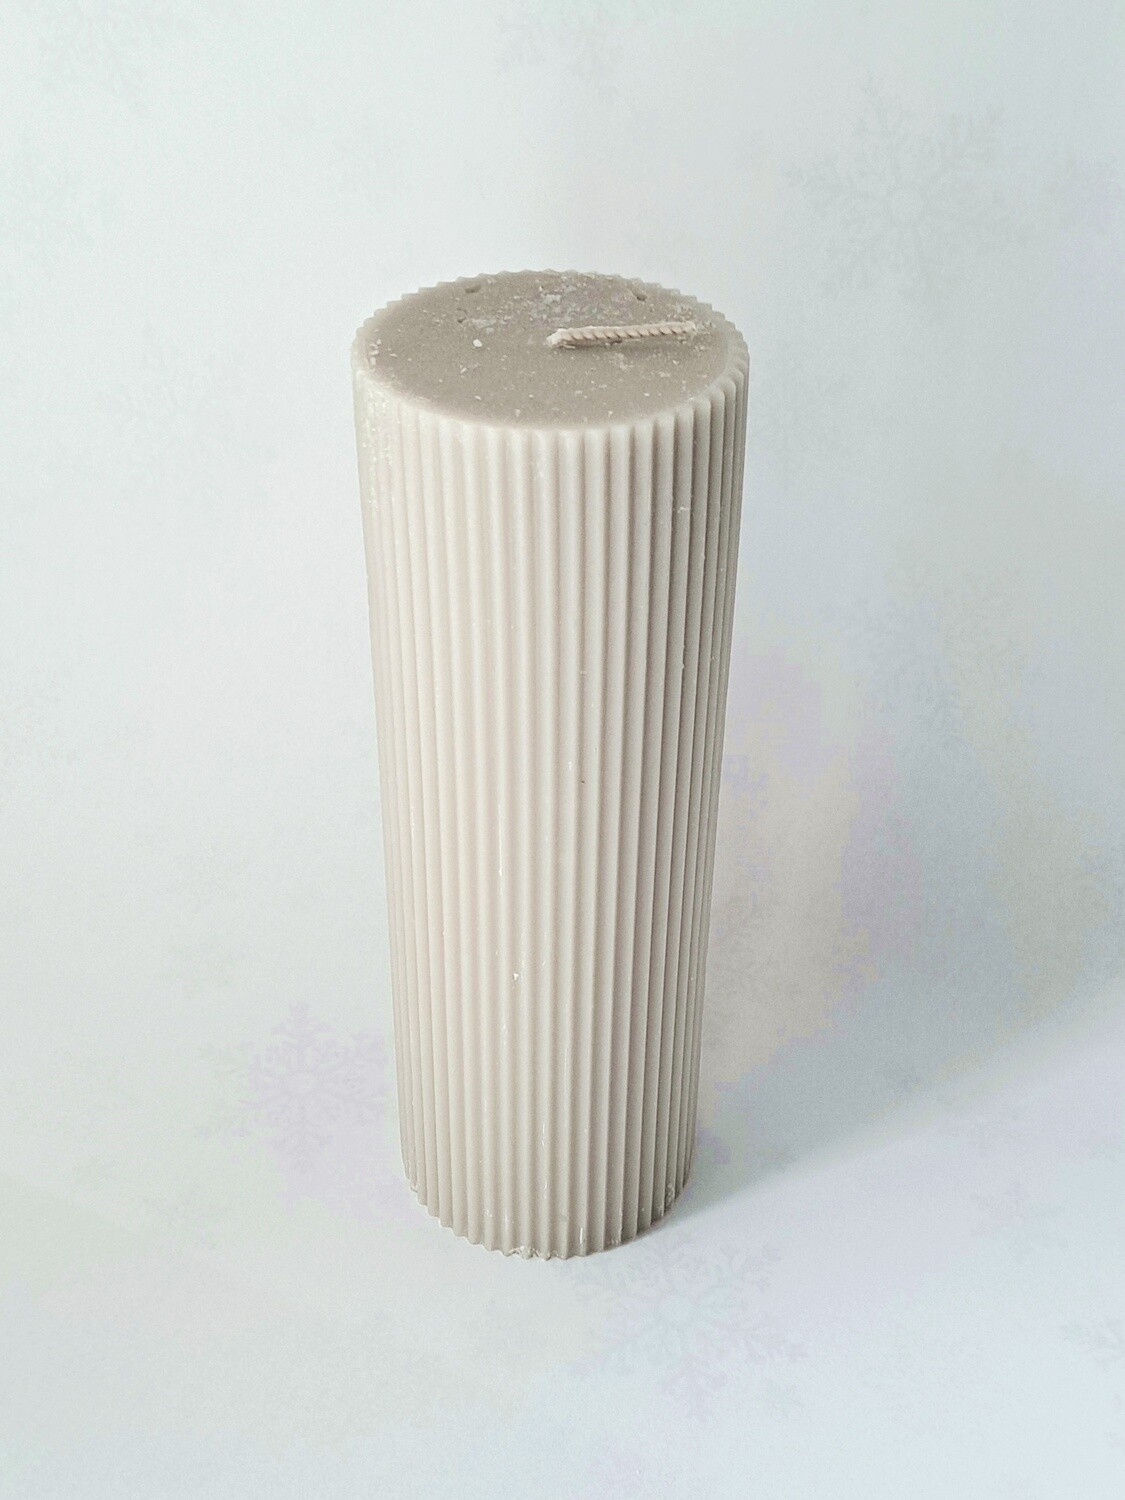 Candle, Ribbed, Grey, H20cm